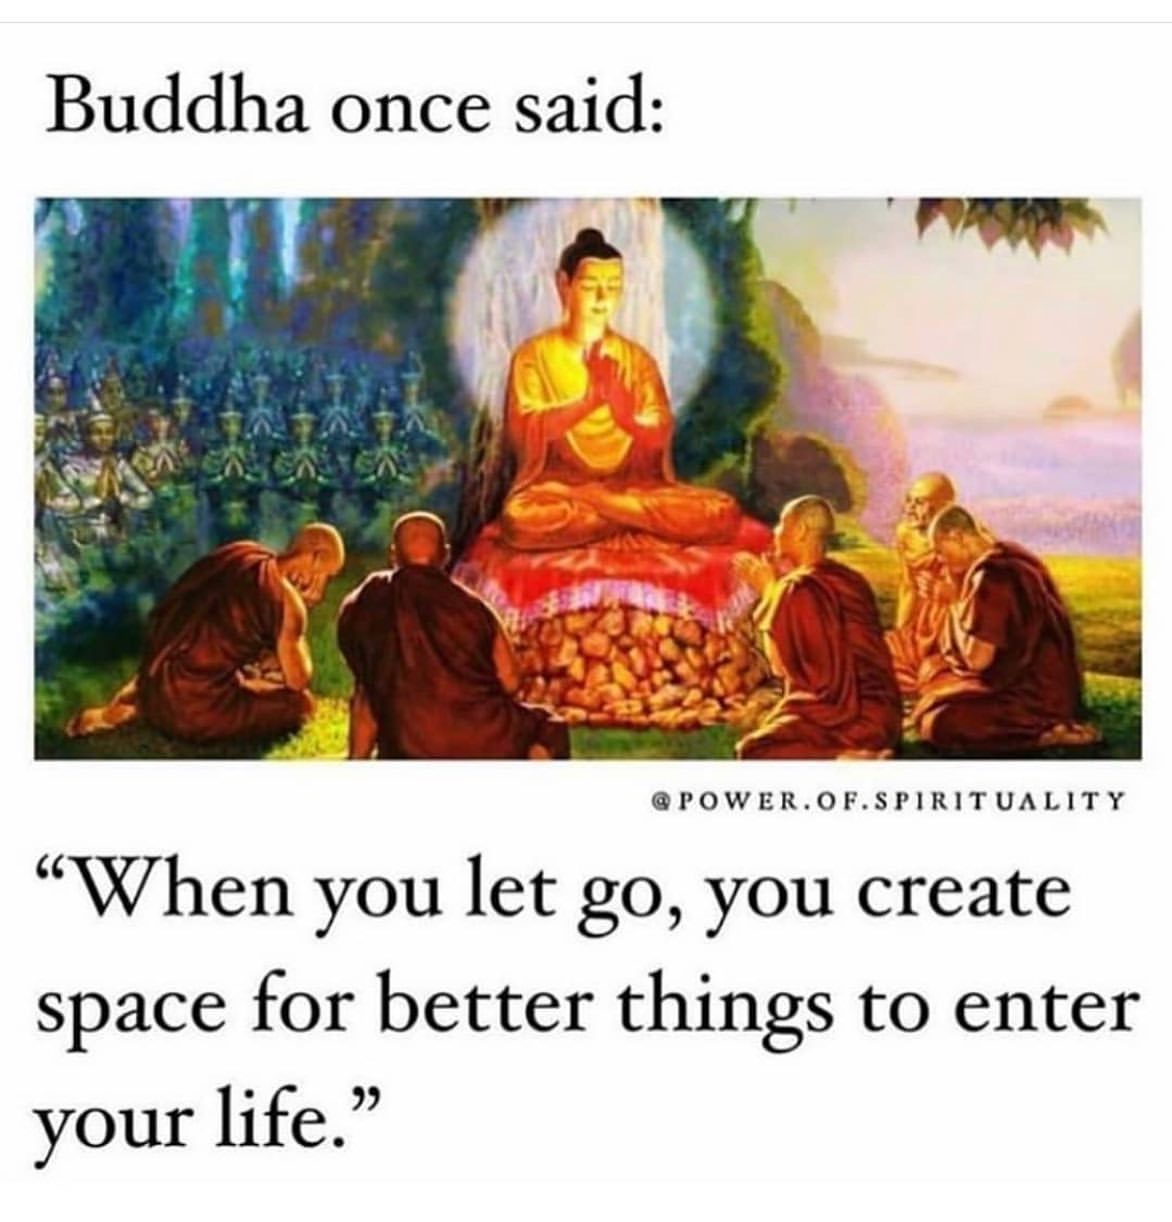 Buddha once said: "When you let go, you create space for better things to enter your life."